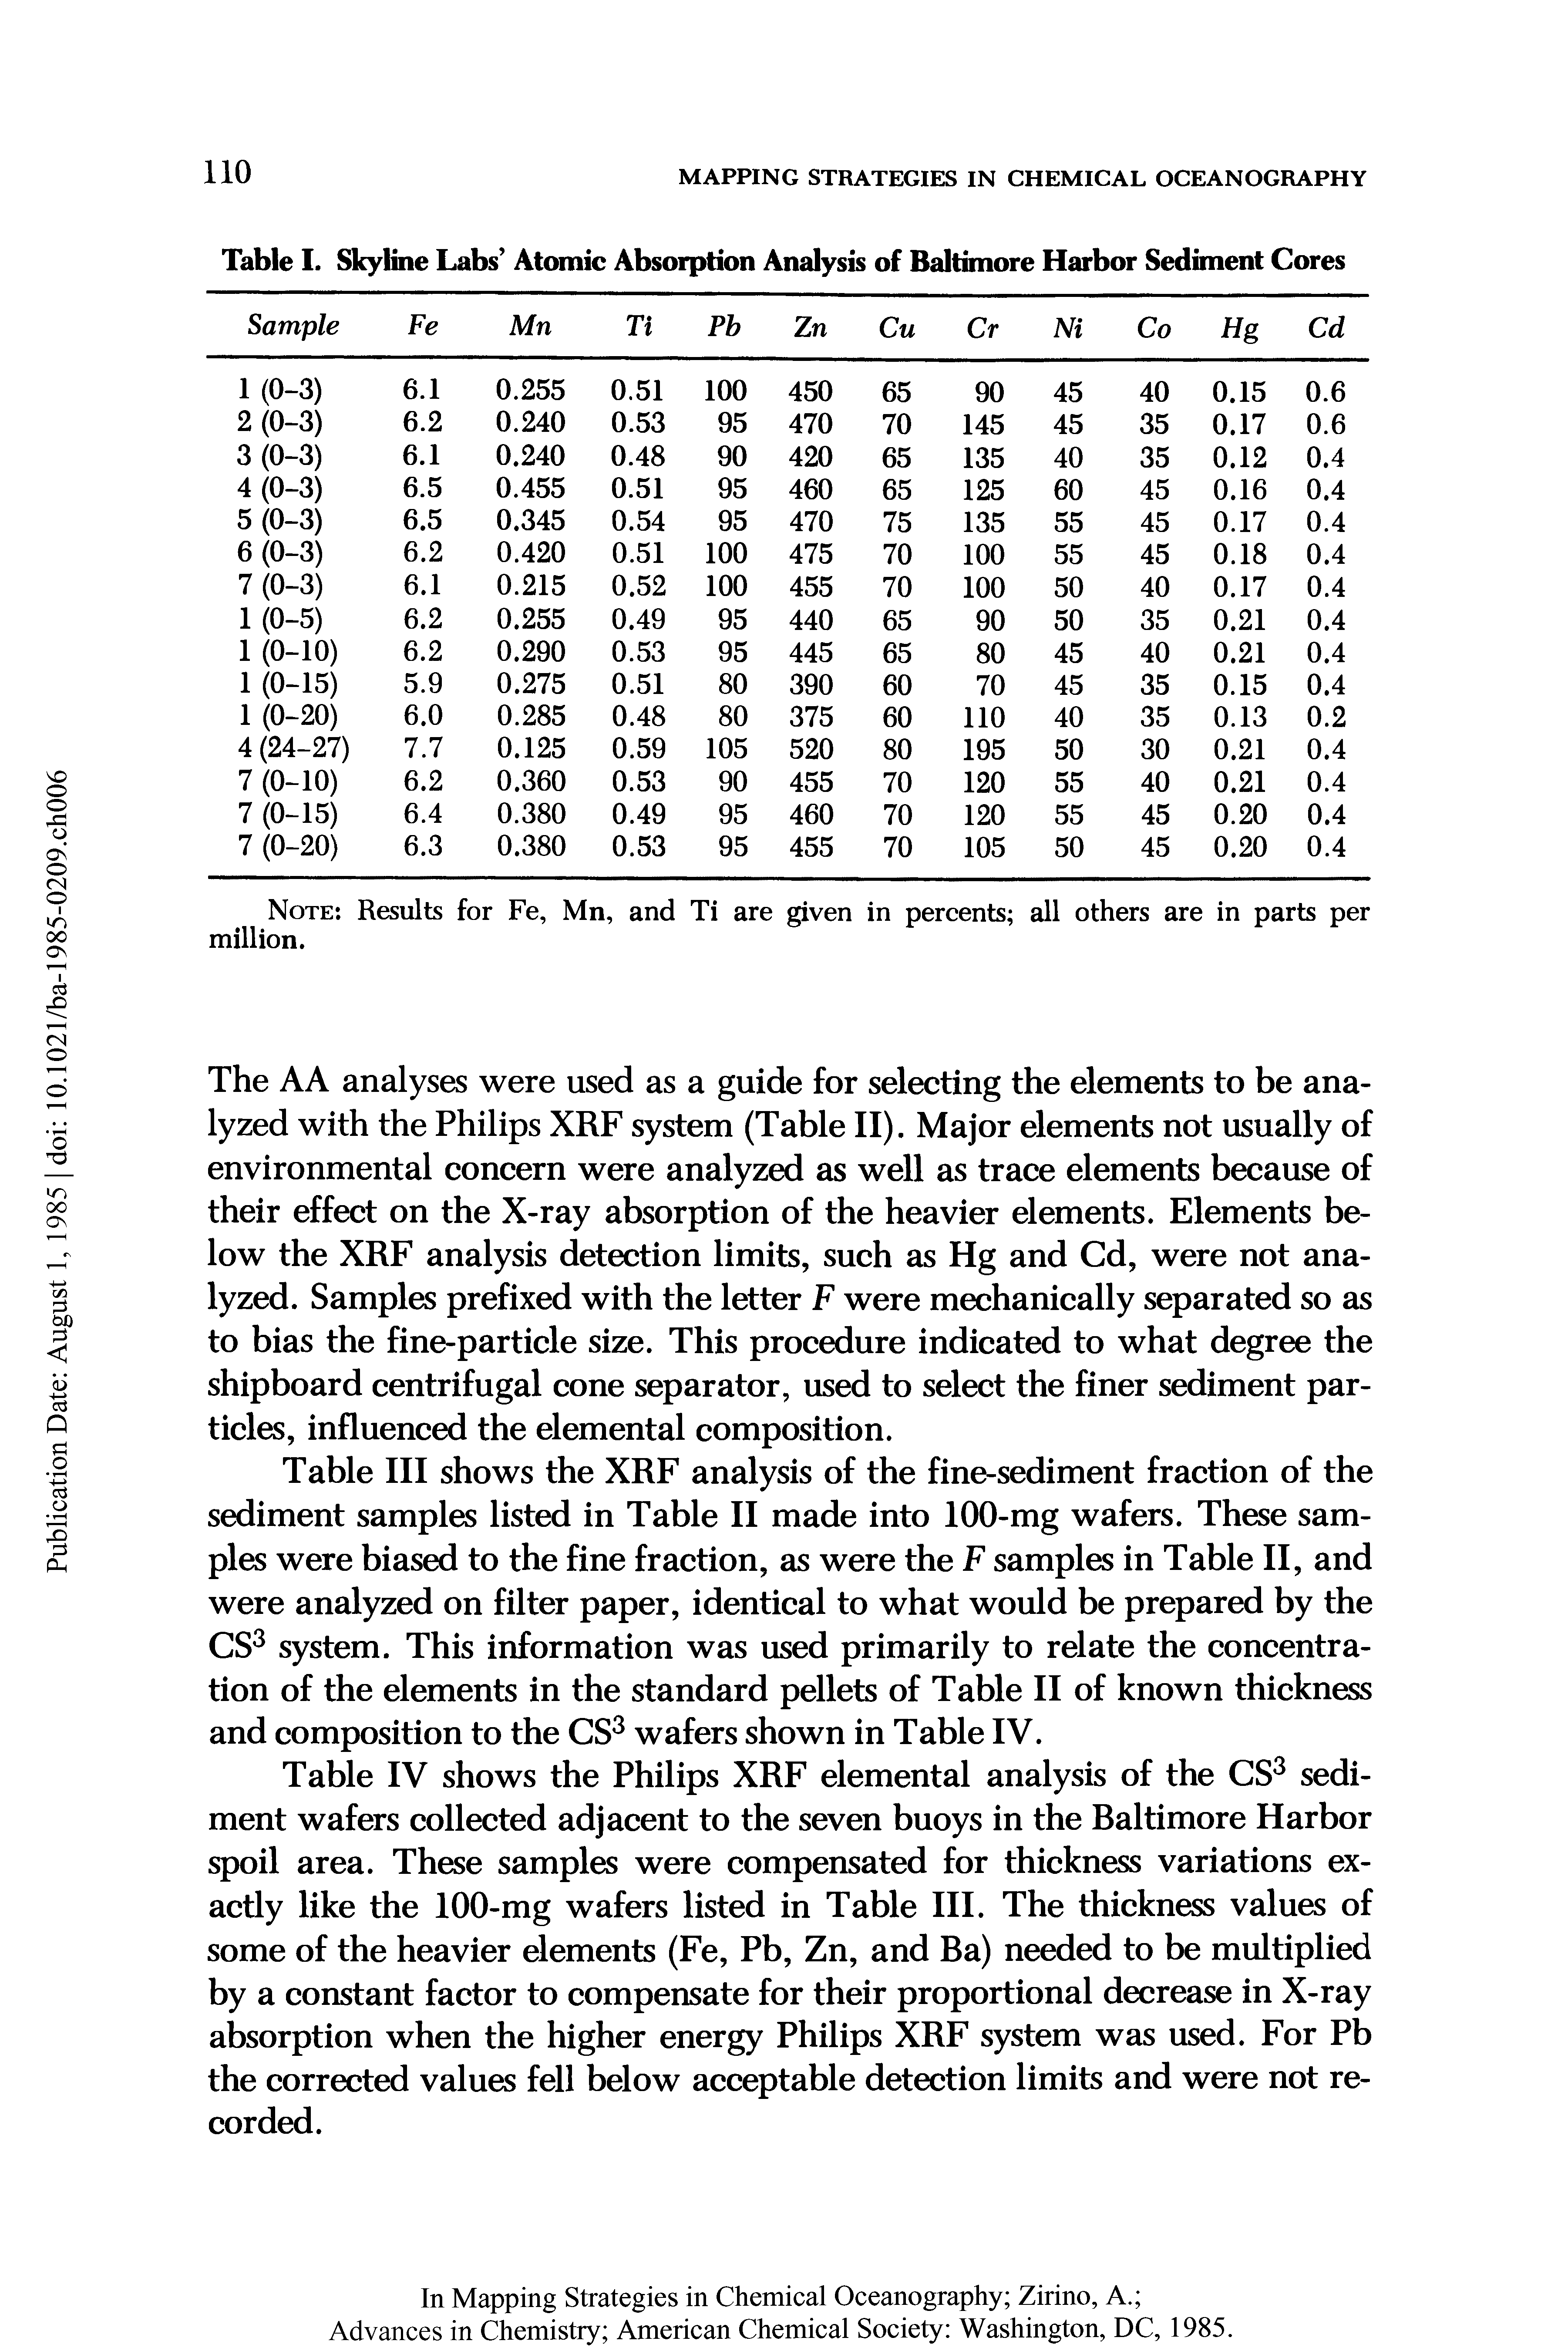 Table III shows the XRF analysis of the fine-sediment fraction of the sediment samples listed in Table II made into 100-mg wafers. These samples were biased to the fine fraction, as were the F samples in Table II, and were analyzed on filter paper, identical to what would be prepared by the CS system. This information was used primarily to relate the concentration of the elements in the standard pellets of Table II of known thickness and composition to the CS wafers shown in Table IV.